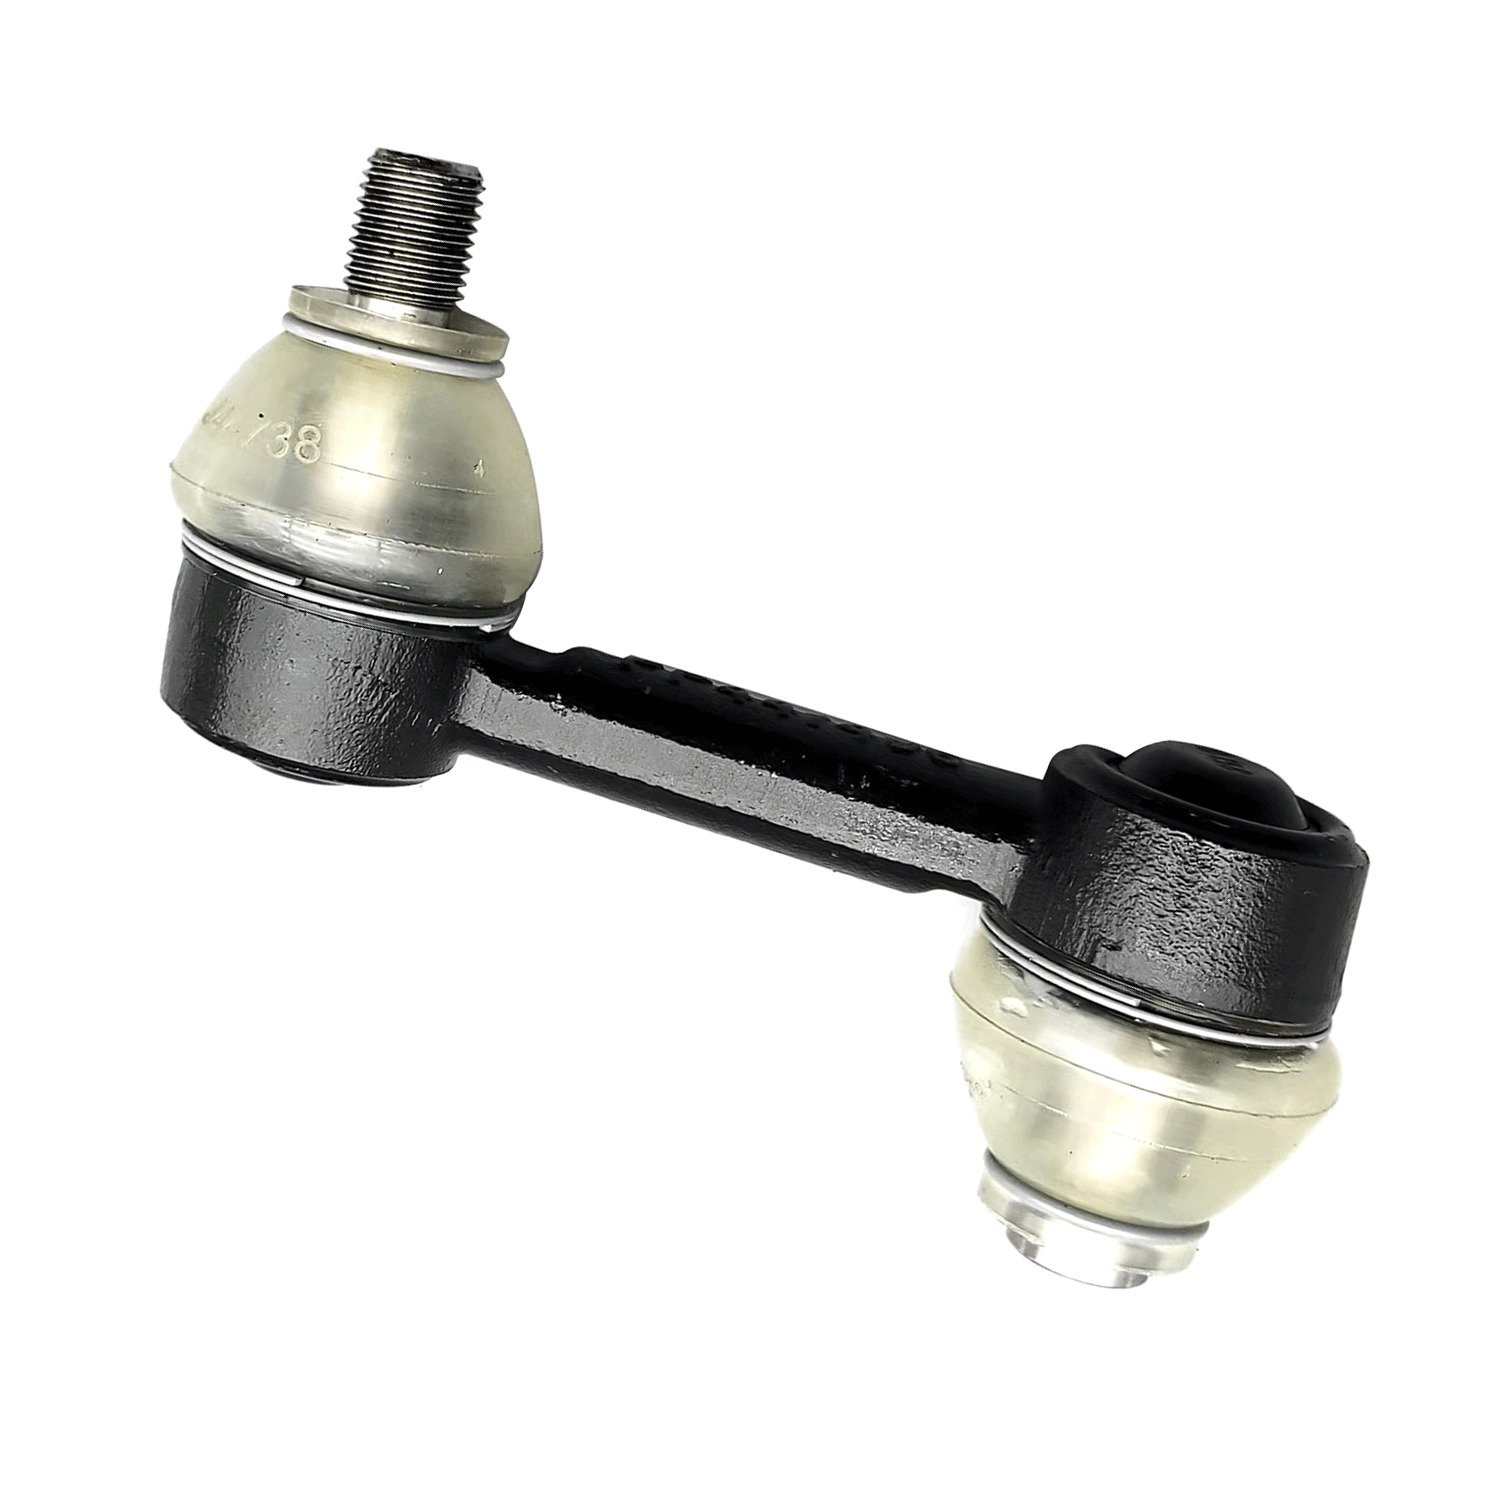 Sway Bar Link PD29195PB Fits For Bentley Arnage 99-09 & Rolls Royce Seraph 99-02